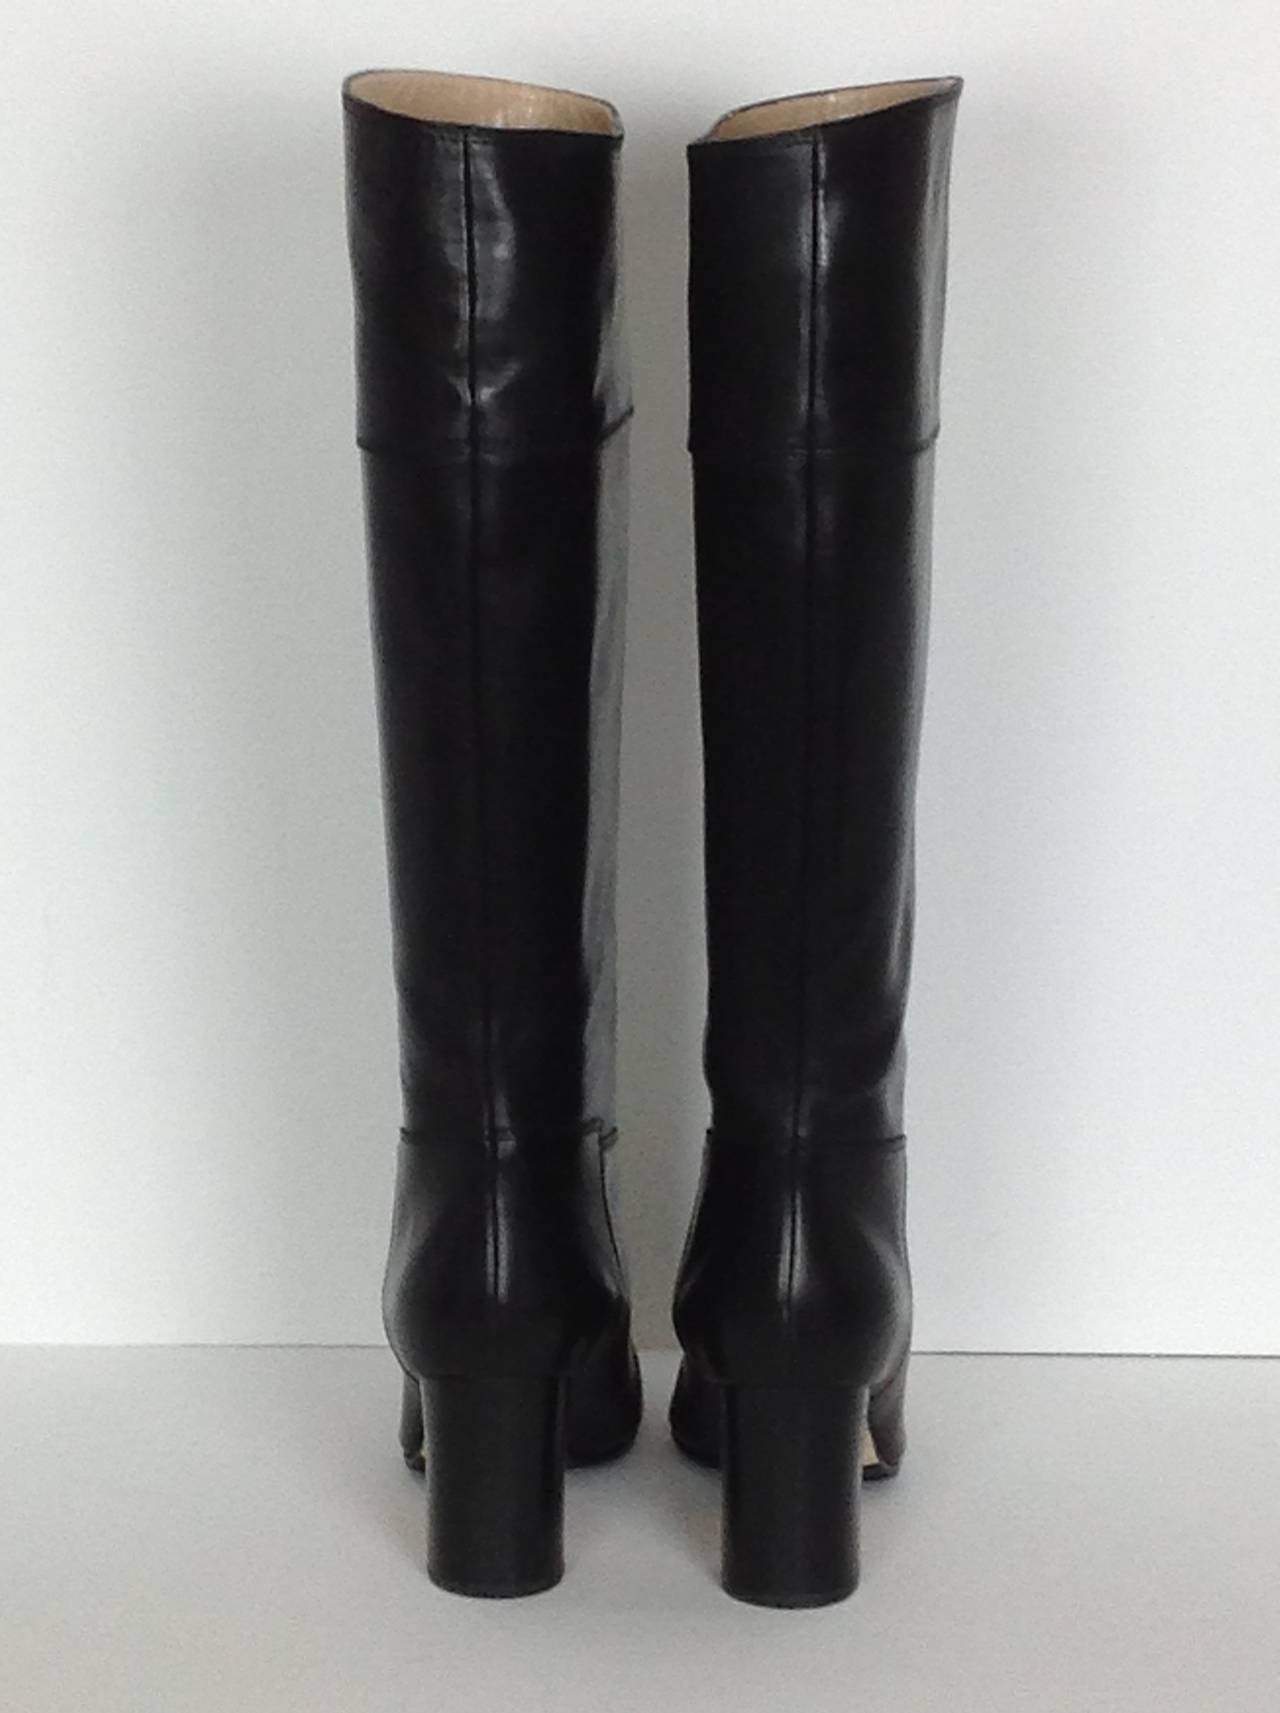 NEW Manolo Blahnik equestrian leather boots                Size 39 1/2 1